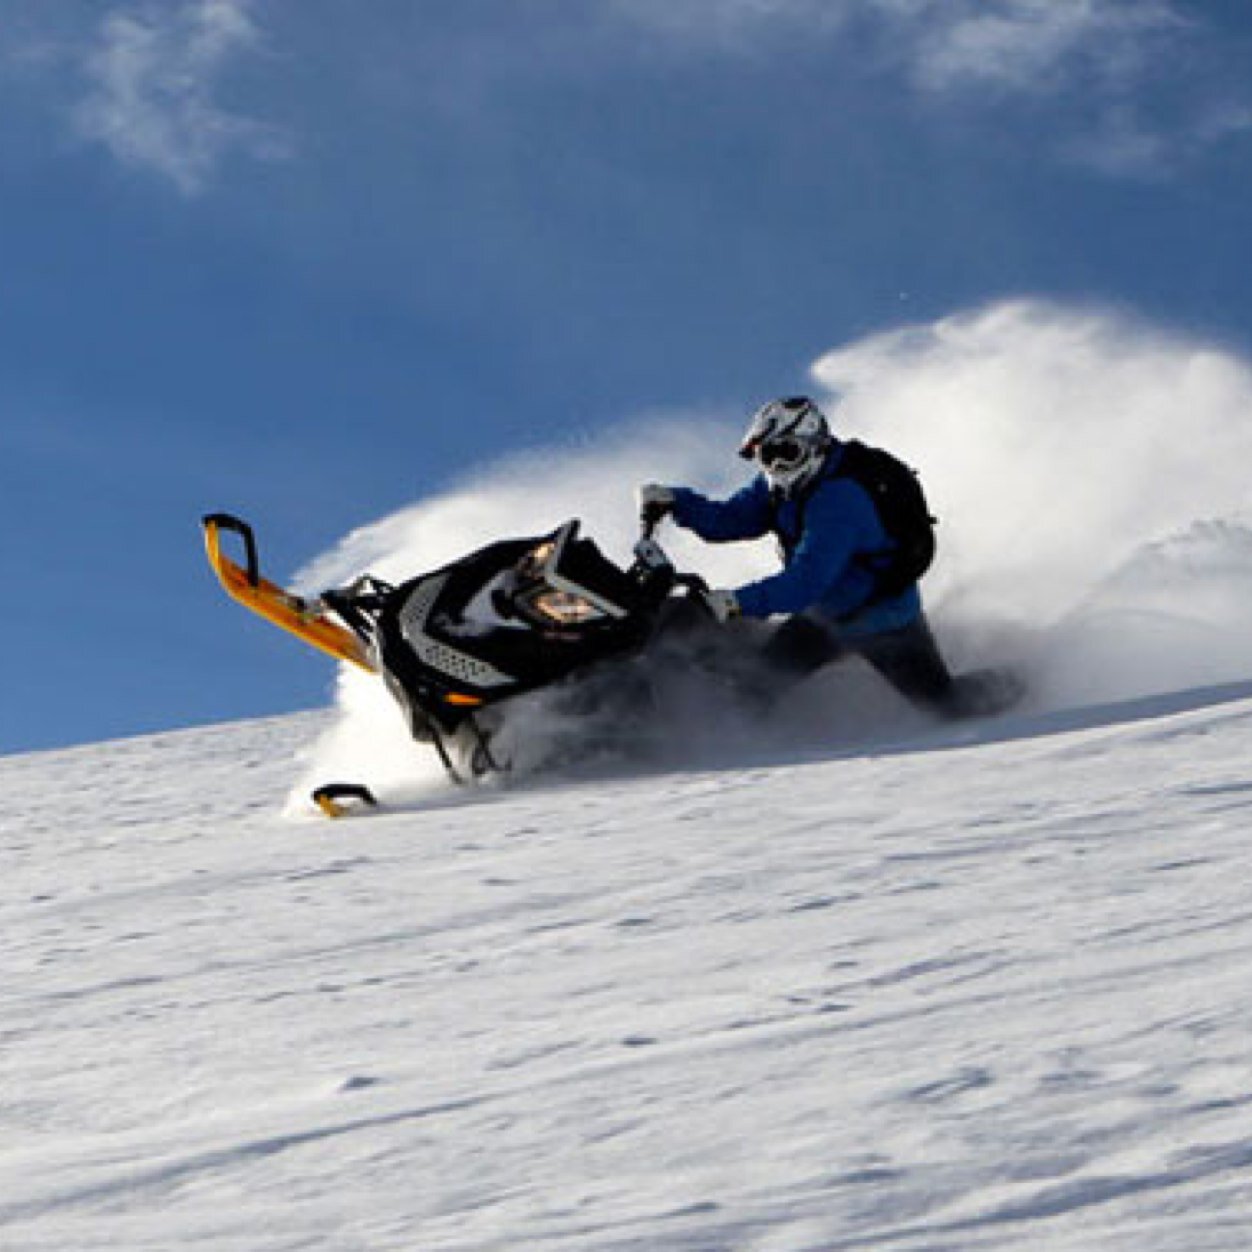 Snowmobile specific avalanche courses brought to you by BCA and Ski-Doo: coming your way for free this fall.